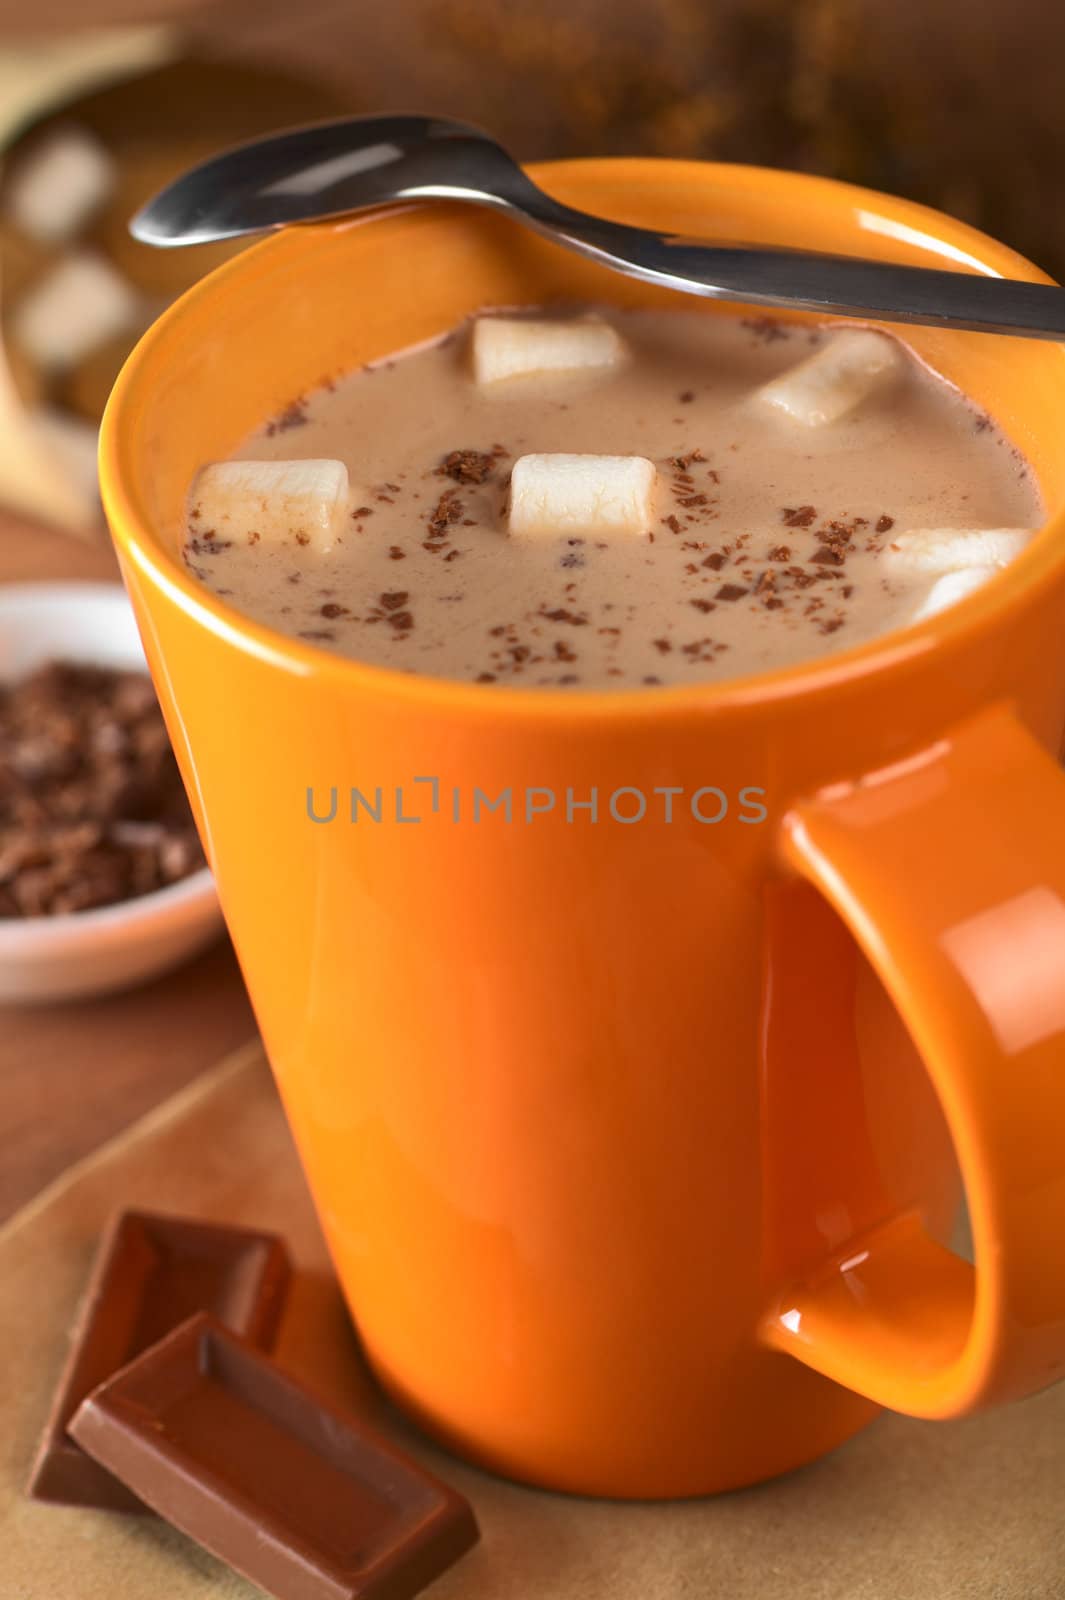 Hot Chocolate with Marshmallows by ildi